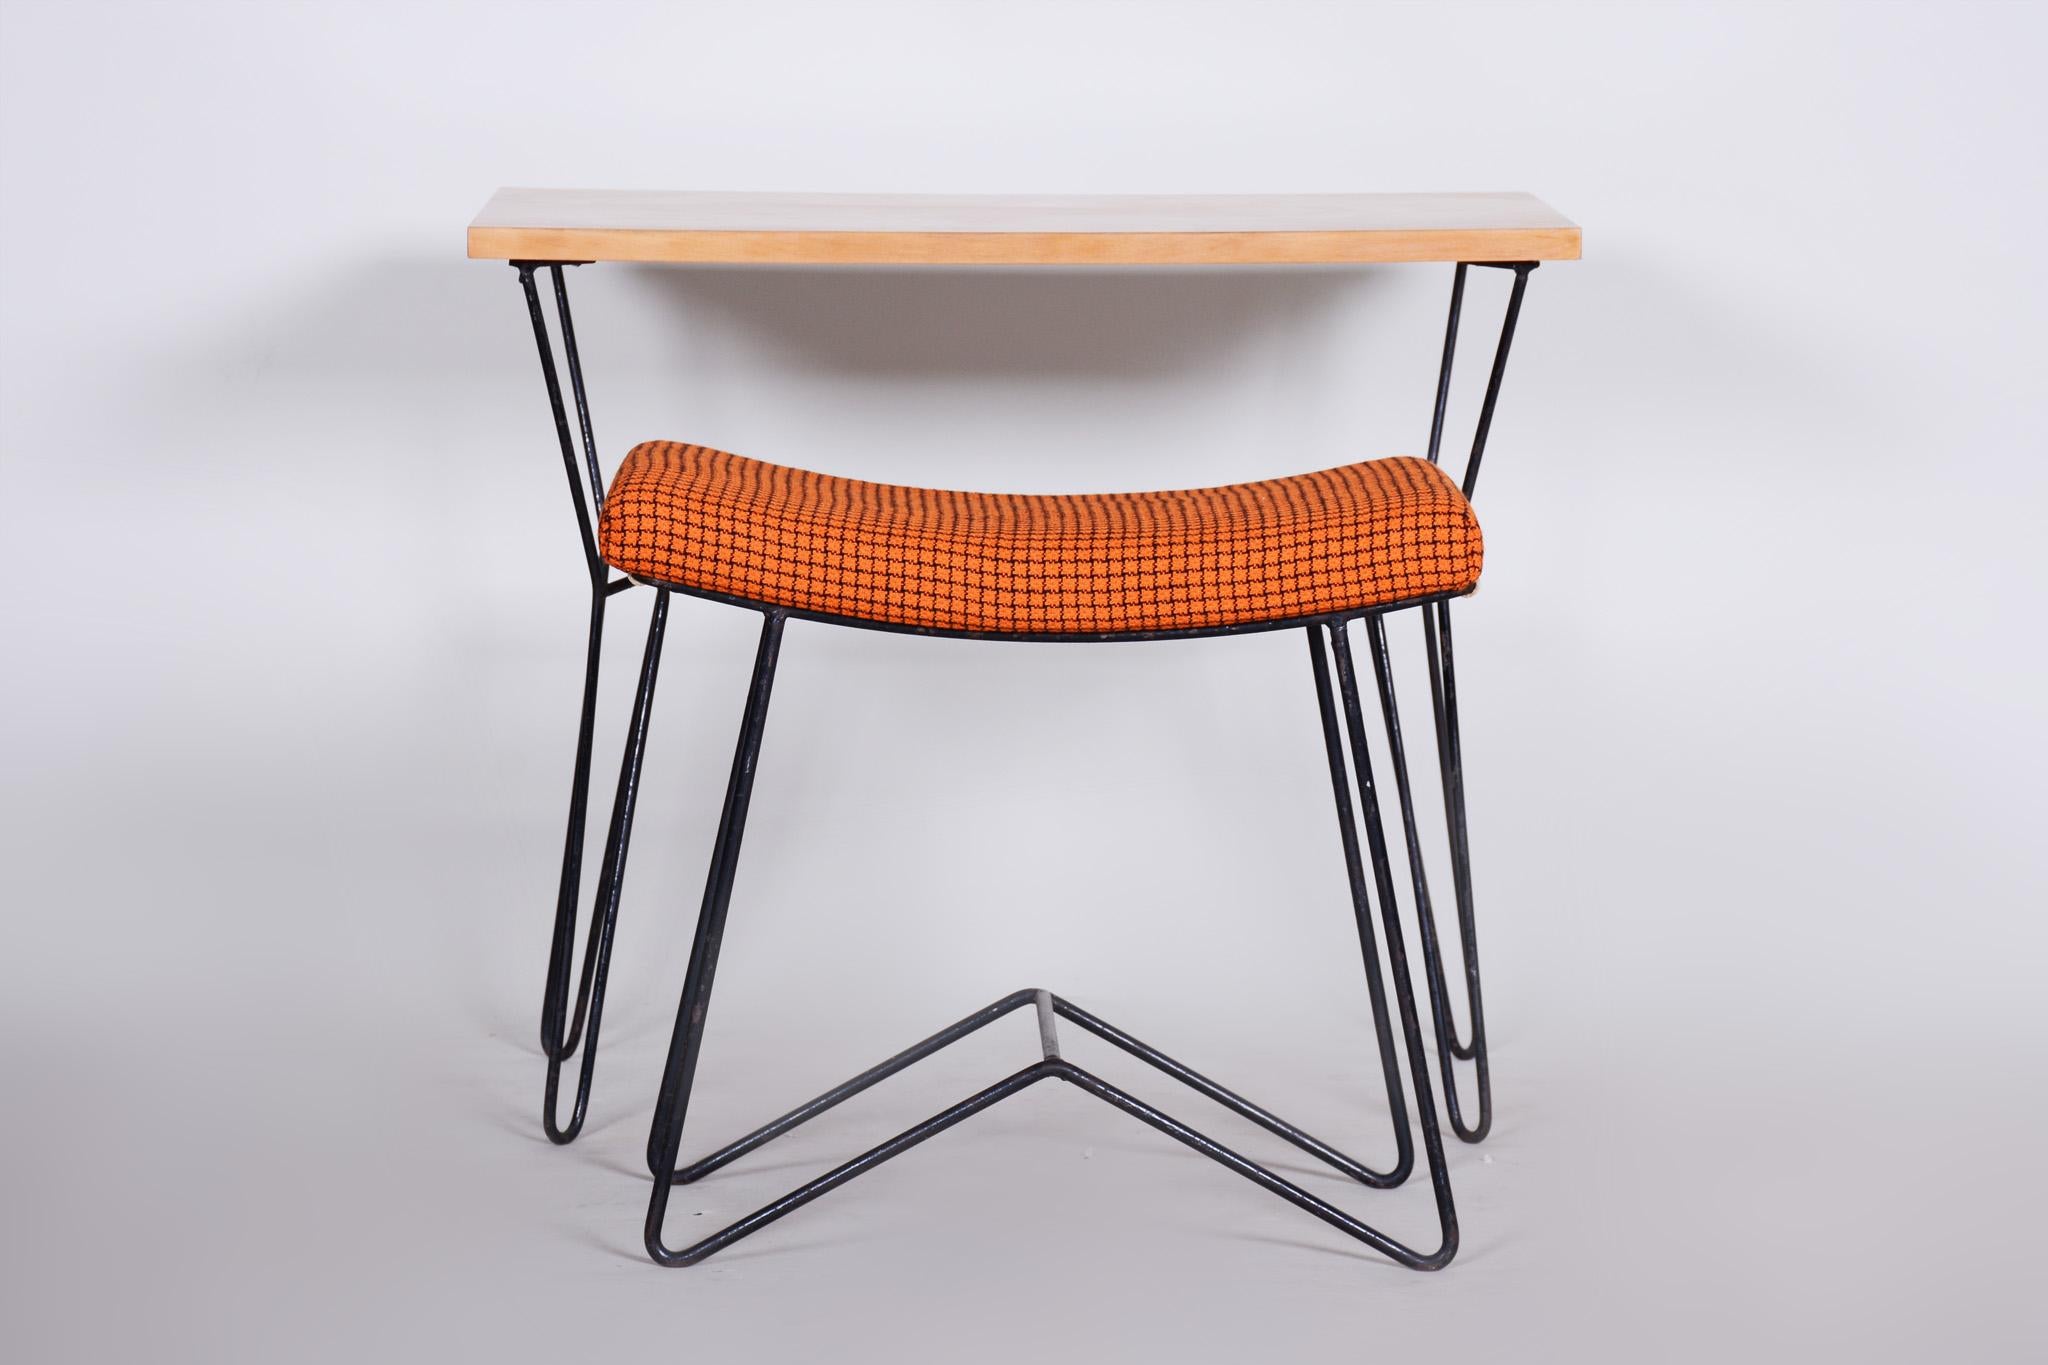 Czech Set of Midcentury Orange Stool and Beech Table, Preserved Condition, 1950s For Sale